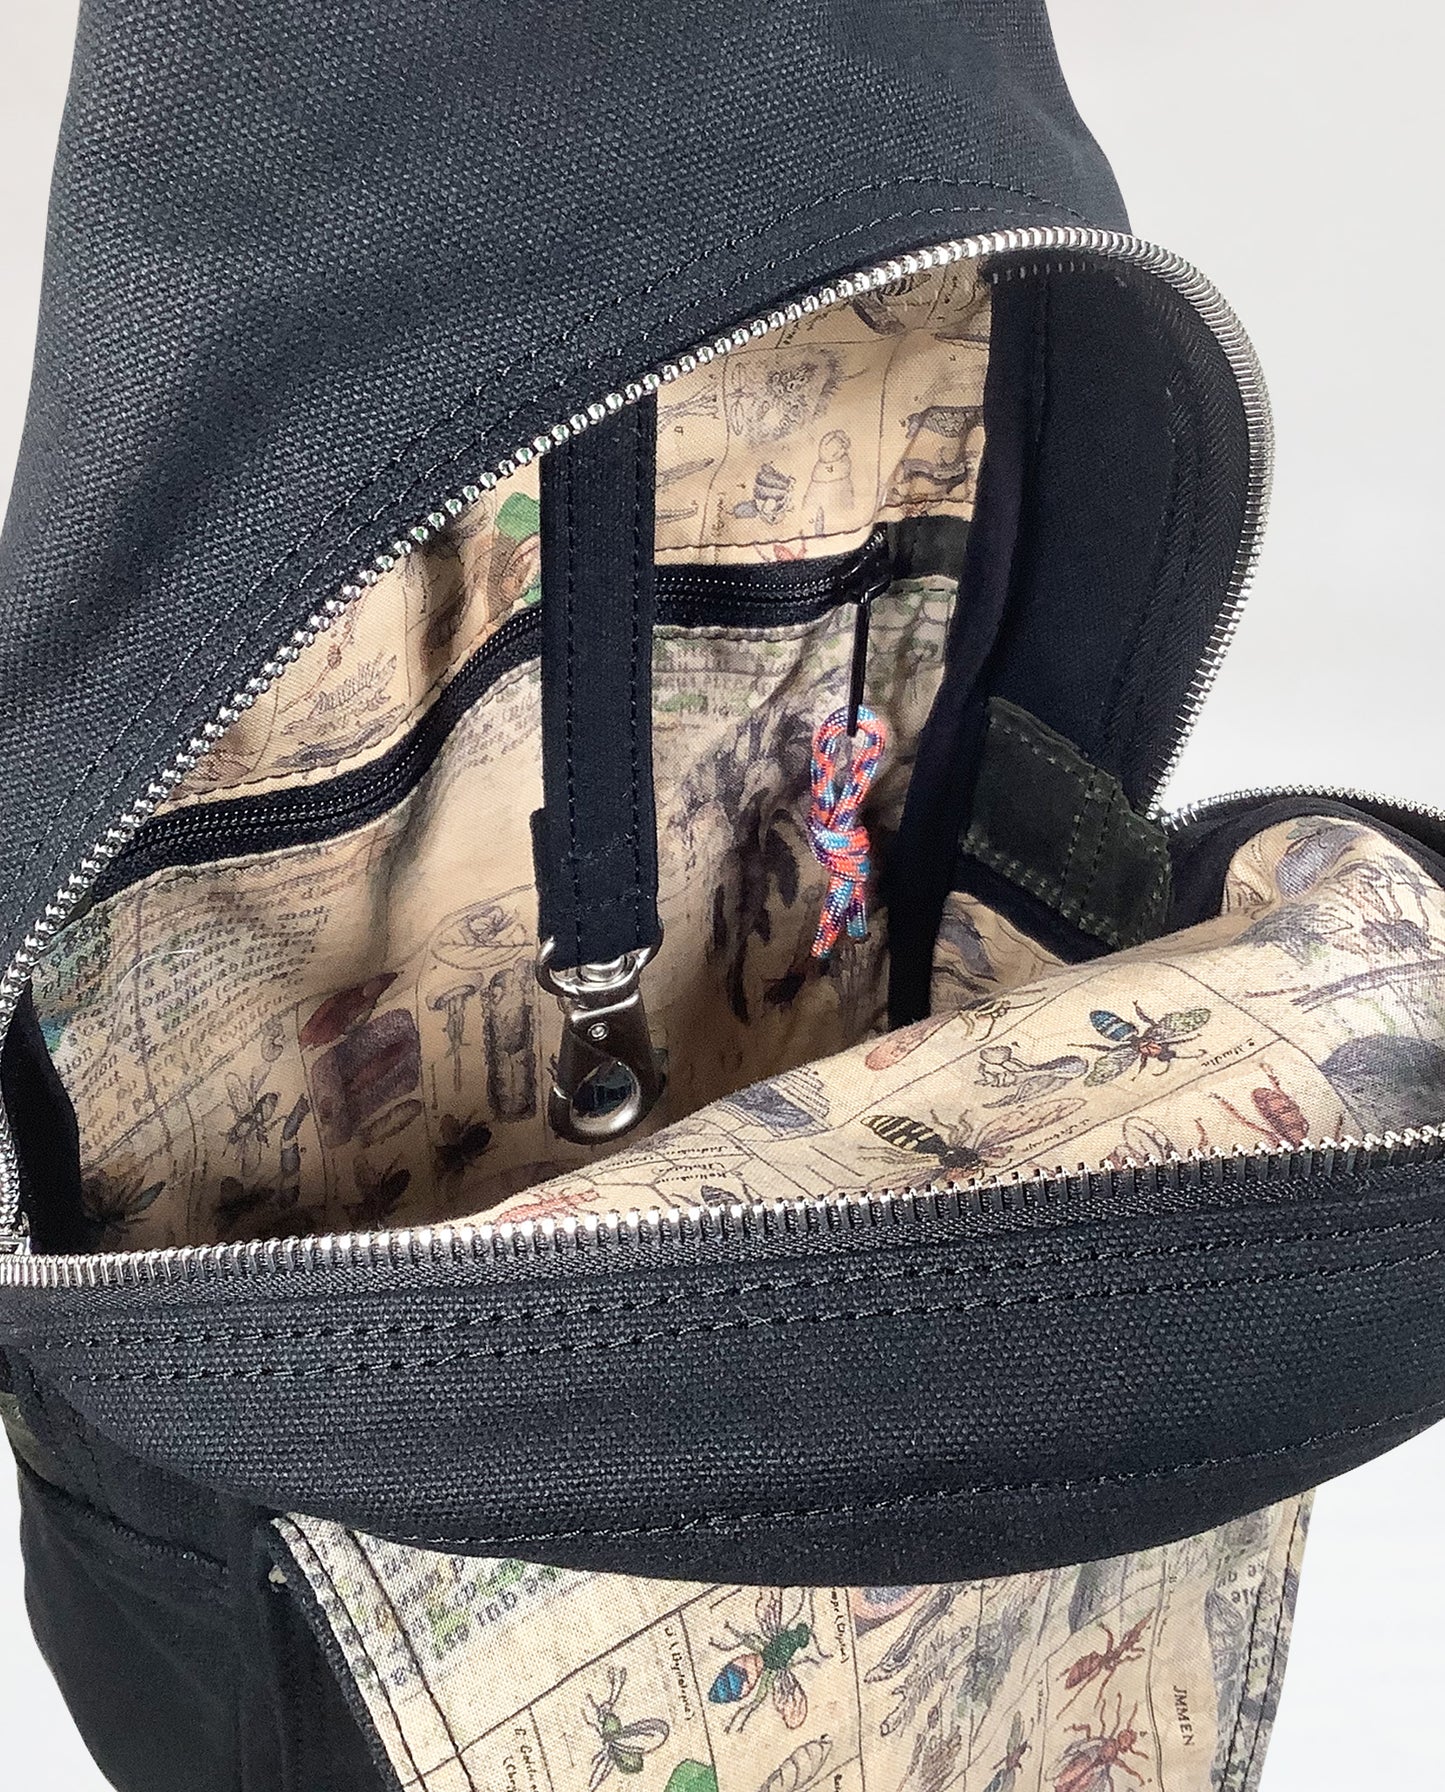 Interior of Dock 5’s Lupine Canvas Sling Bag in black featuring a leash for keys and a zipper pocket